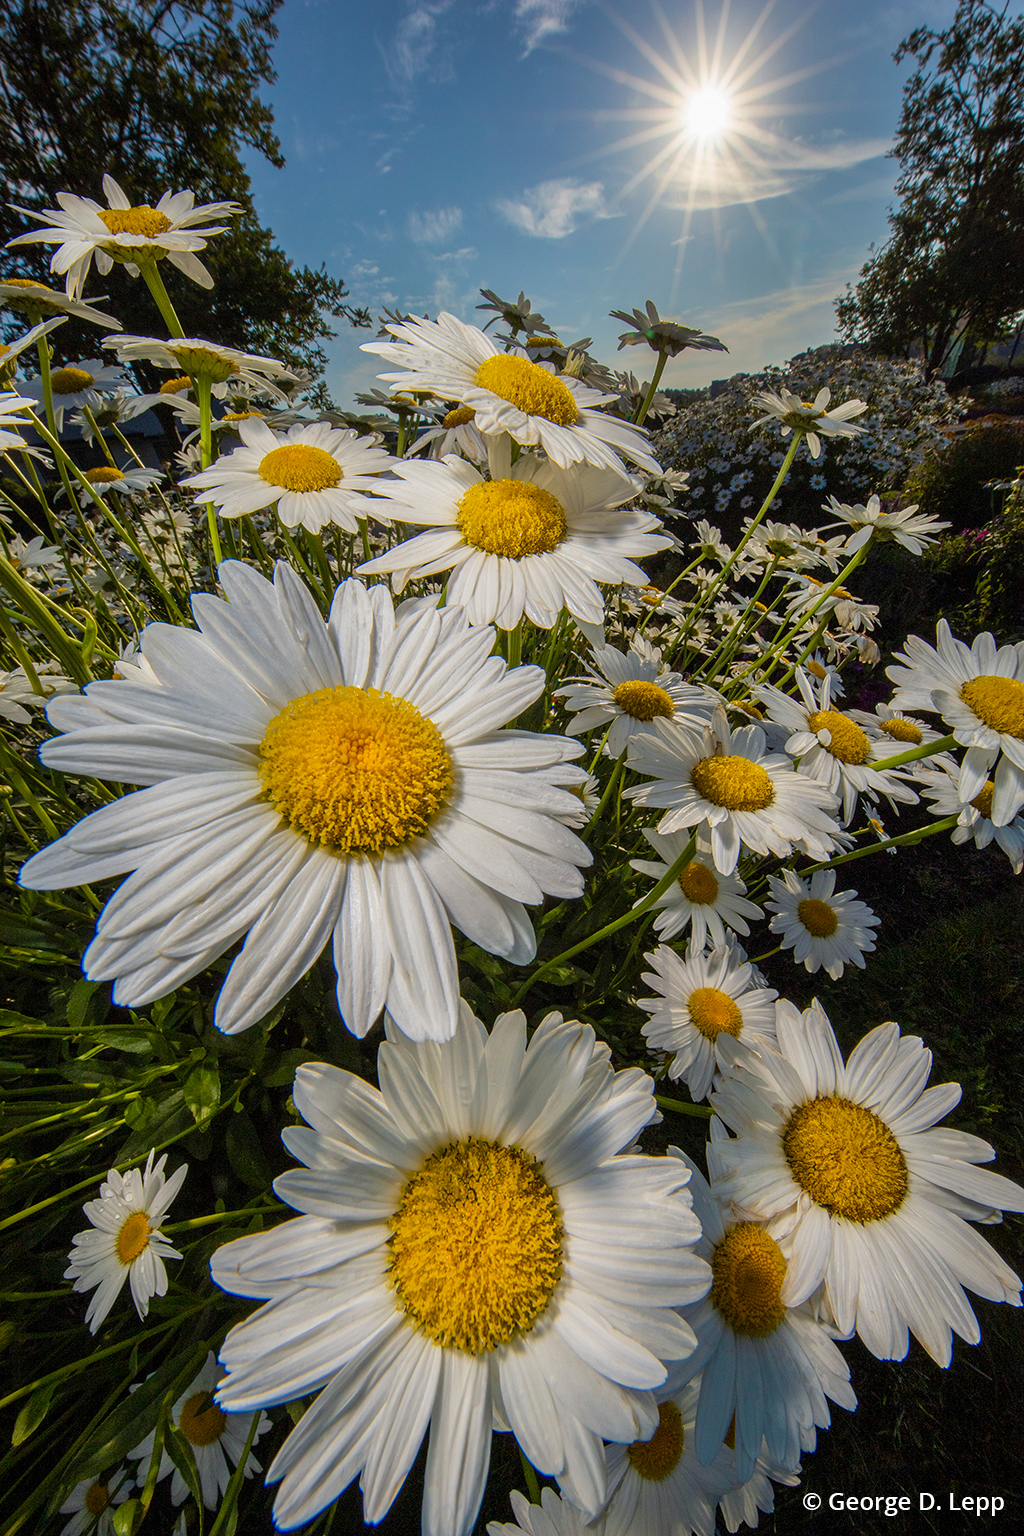 Close-up of daisies taken with a wide-angle lens